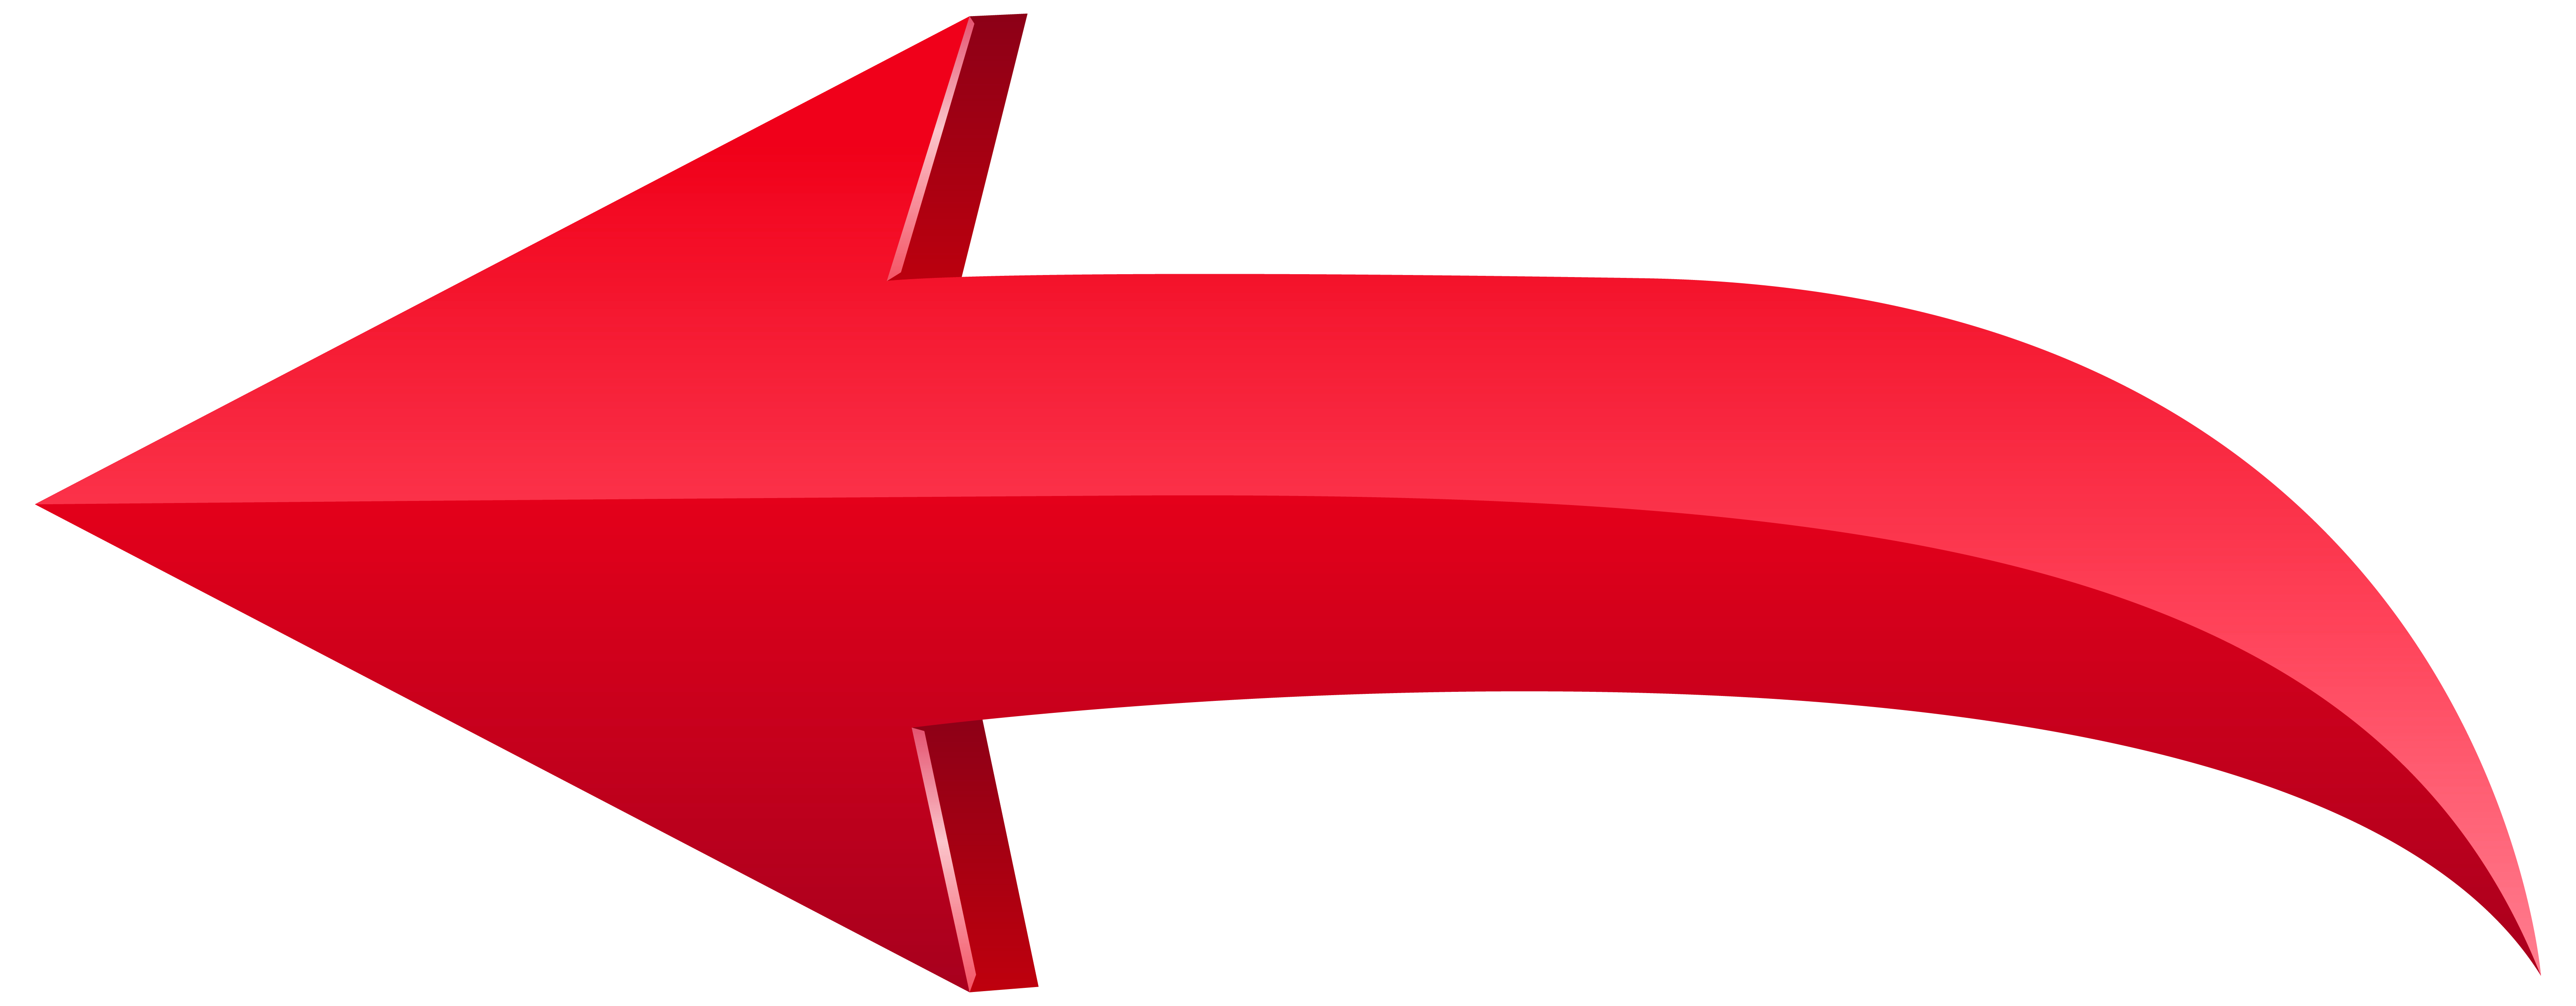 Arrow Red Left Png Transparent Clip Art Image Gallery